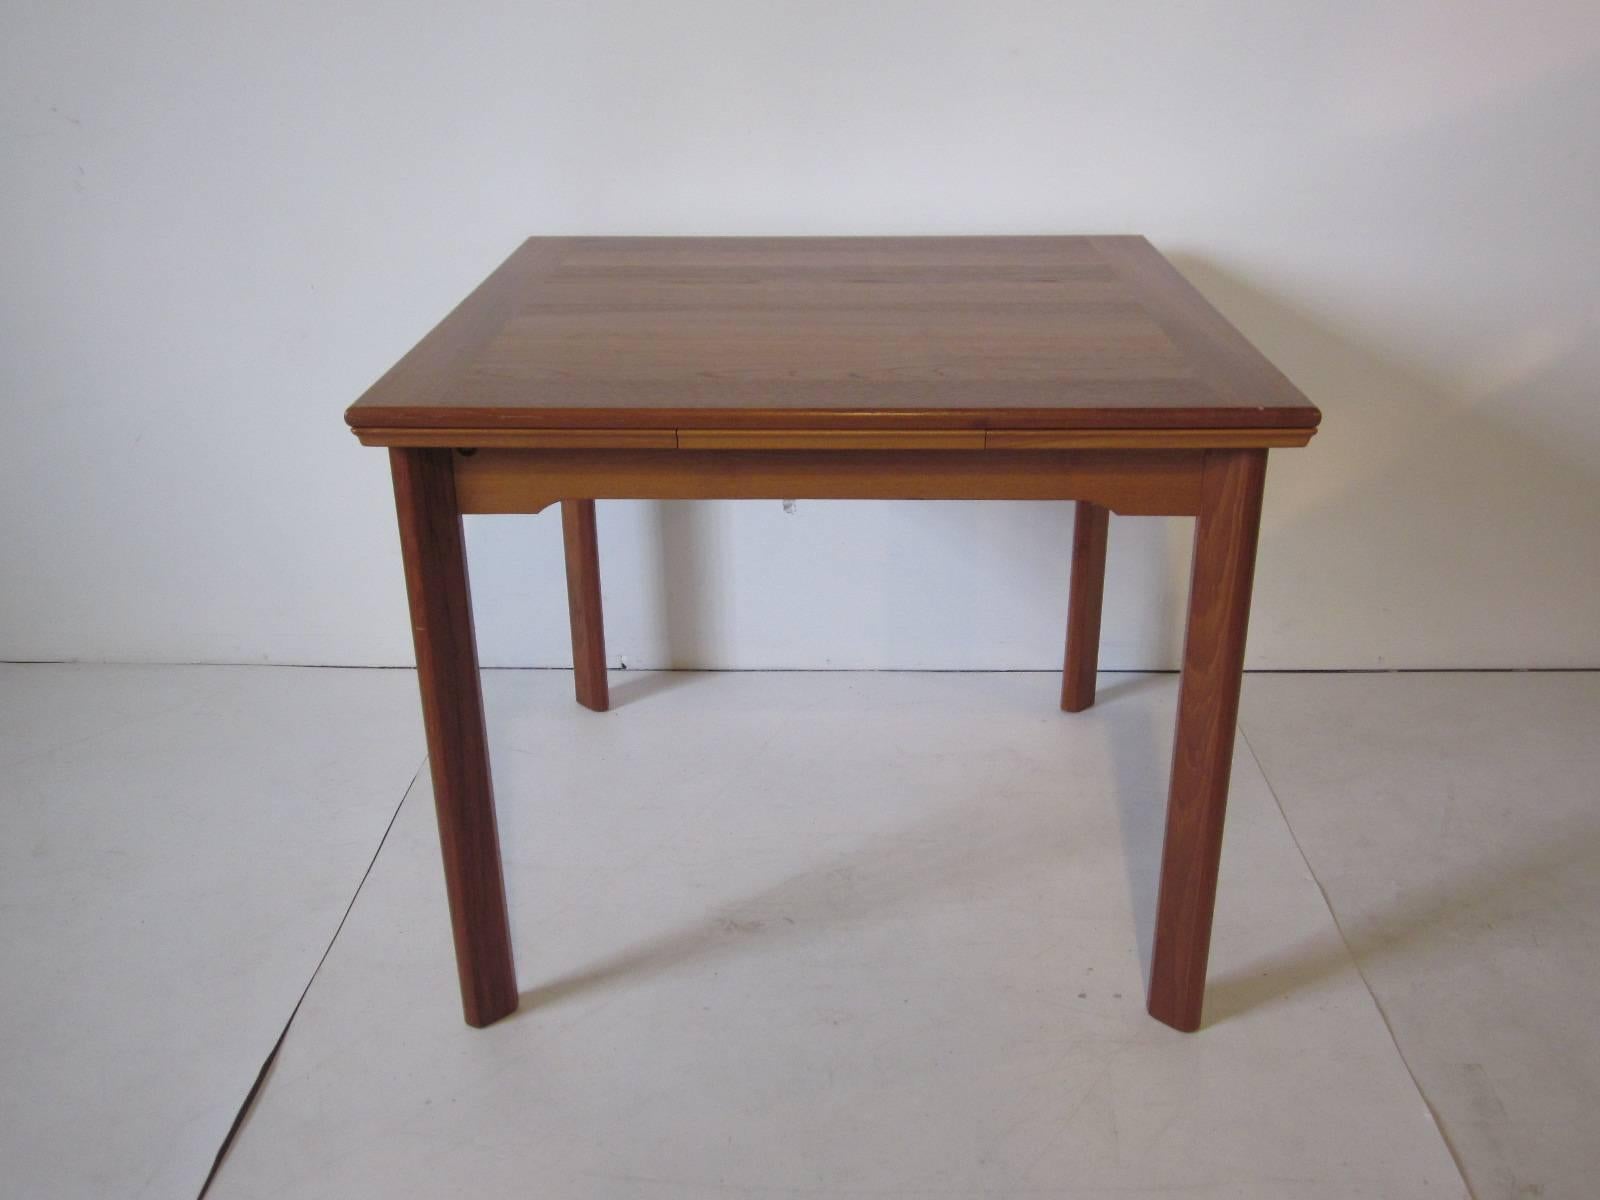 A petite sized teakwood dining table with pull-out leaves to each end, Retains the manufactures tag Made in Demark by Uldum Mobelfabrik . Measurement closed is 34.50